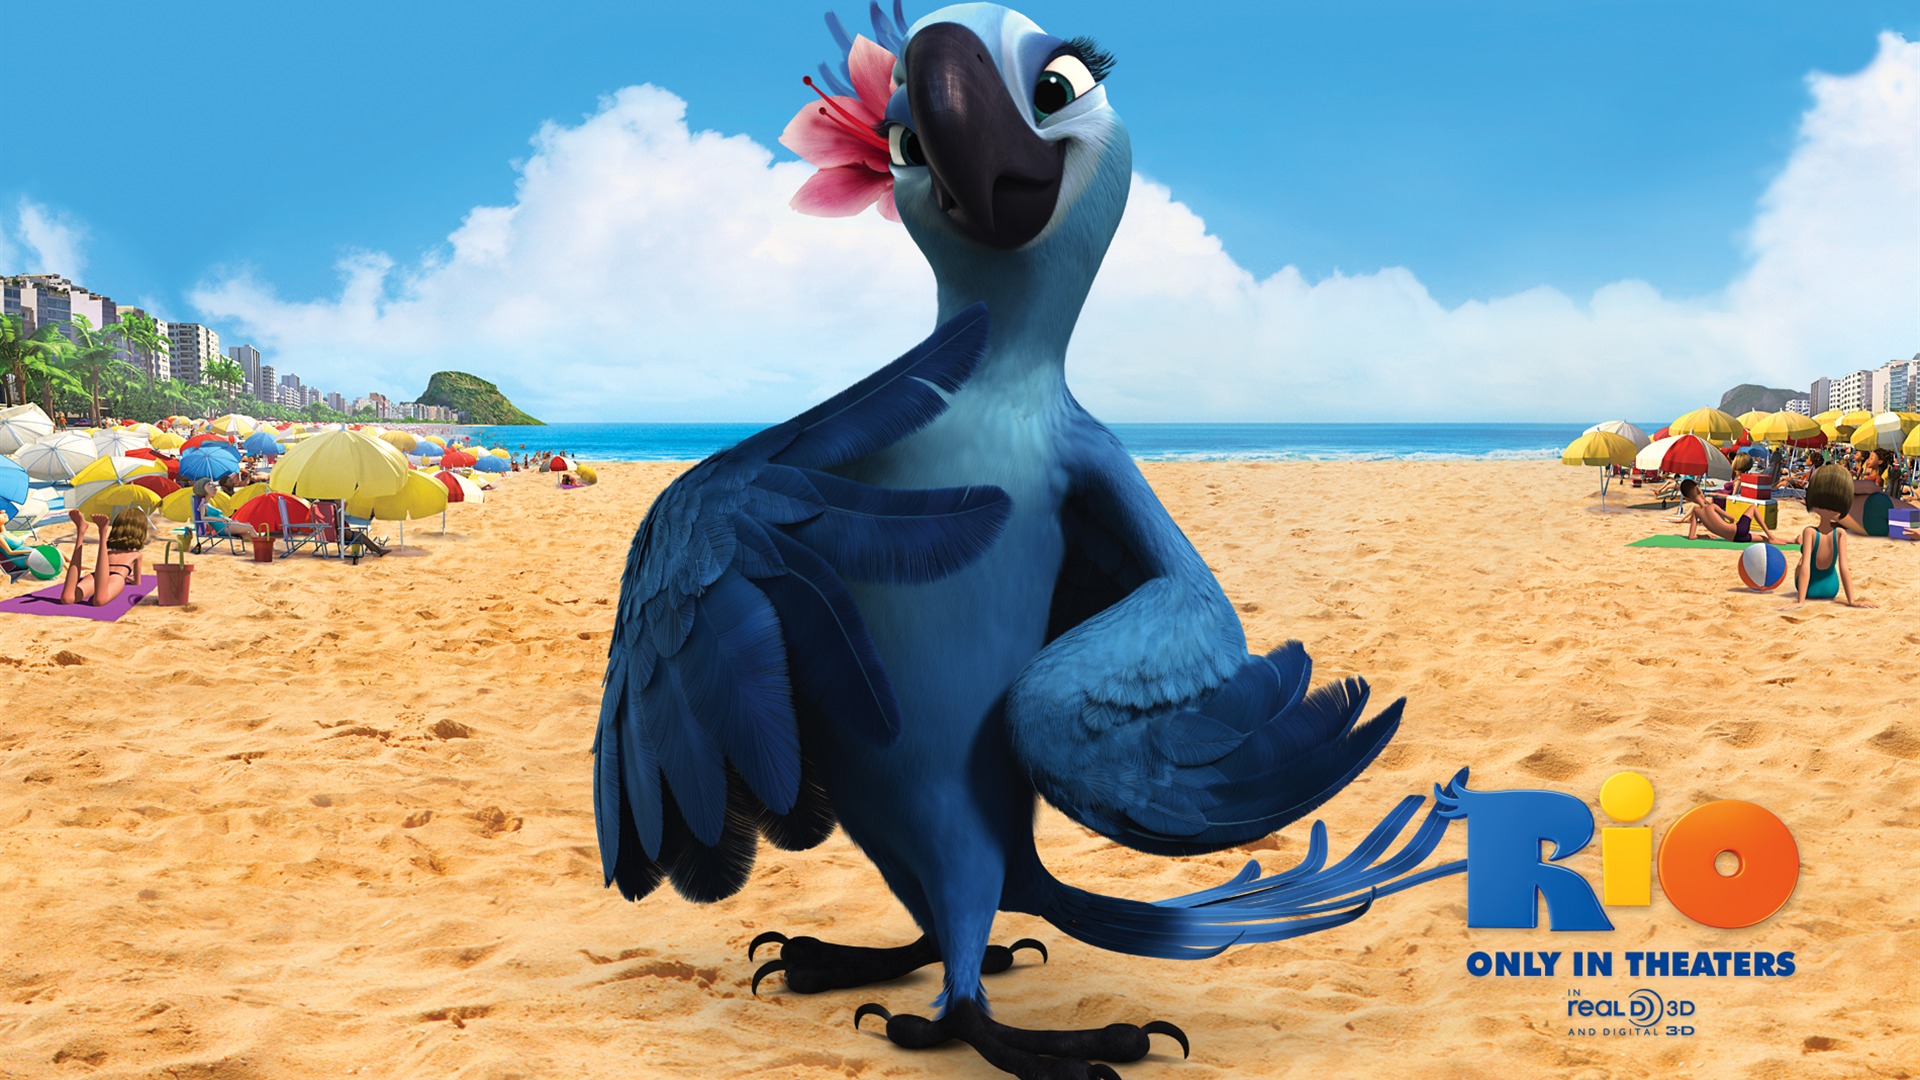 Rio 2011 wallpapers #5 - 1920x1080